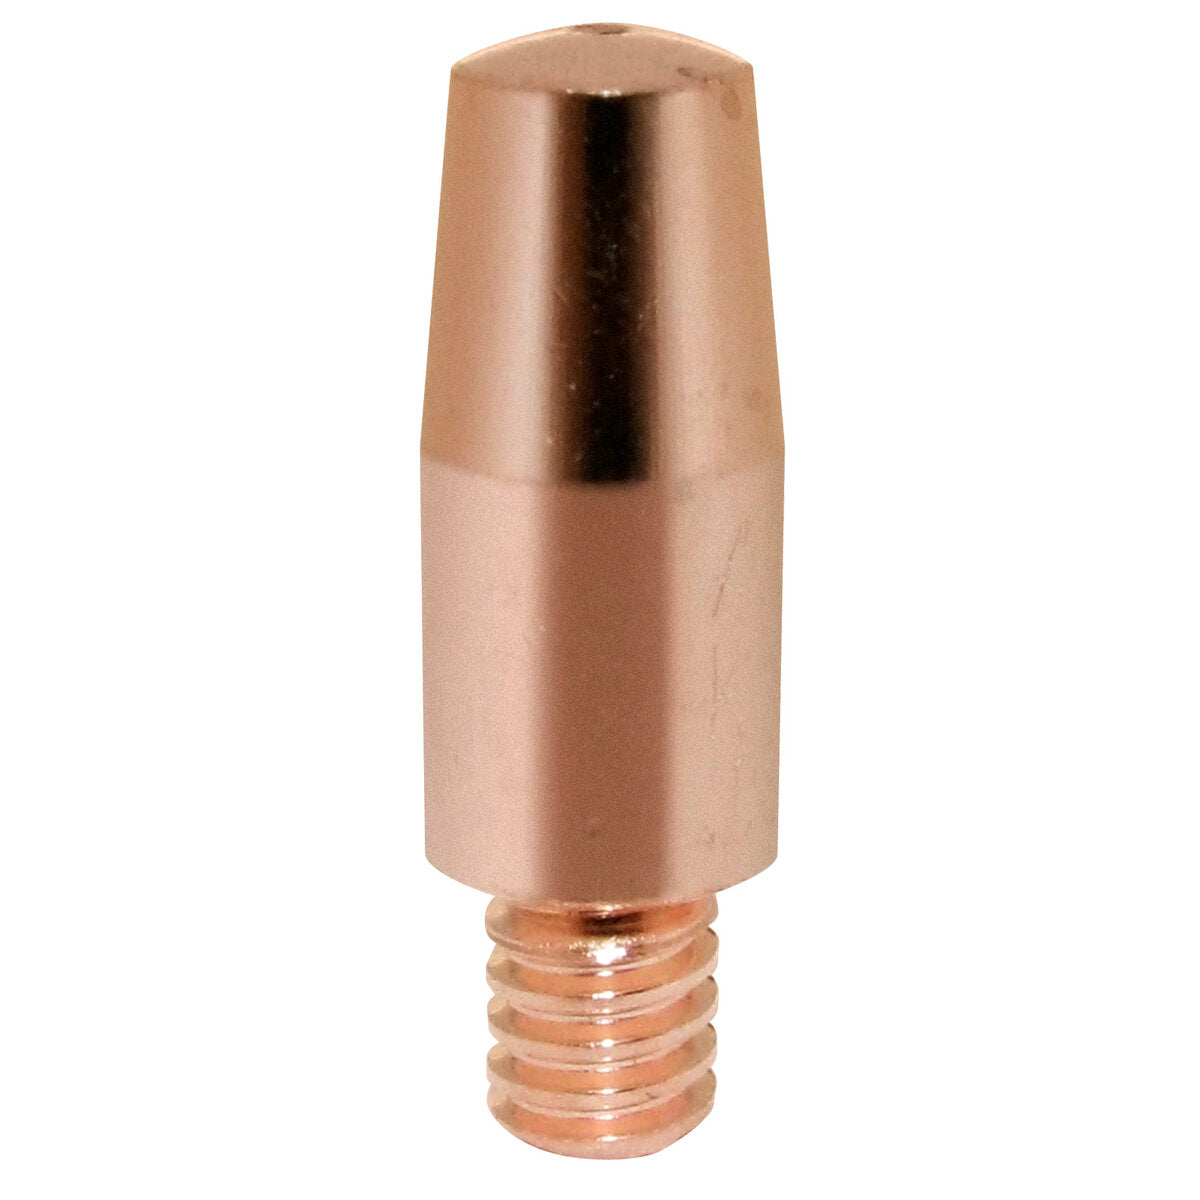 Lincoln Electric - Copper Plus® Contact Tip - 350A, Aluminum, 3/64 in (1.2 mm) - 10/pack - KP2744-364A